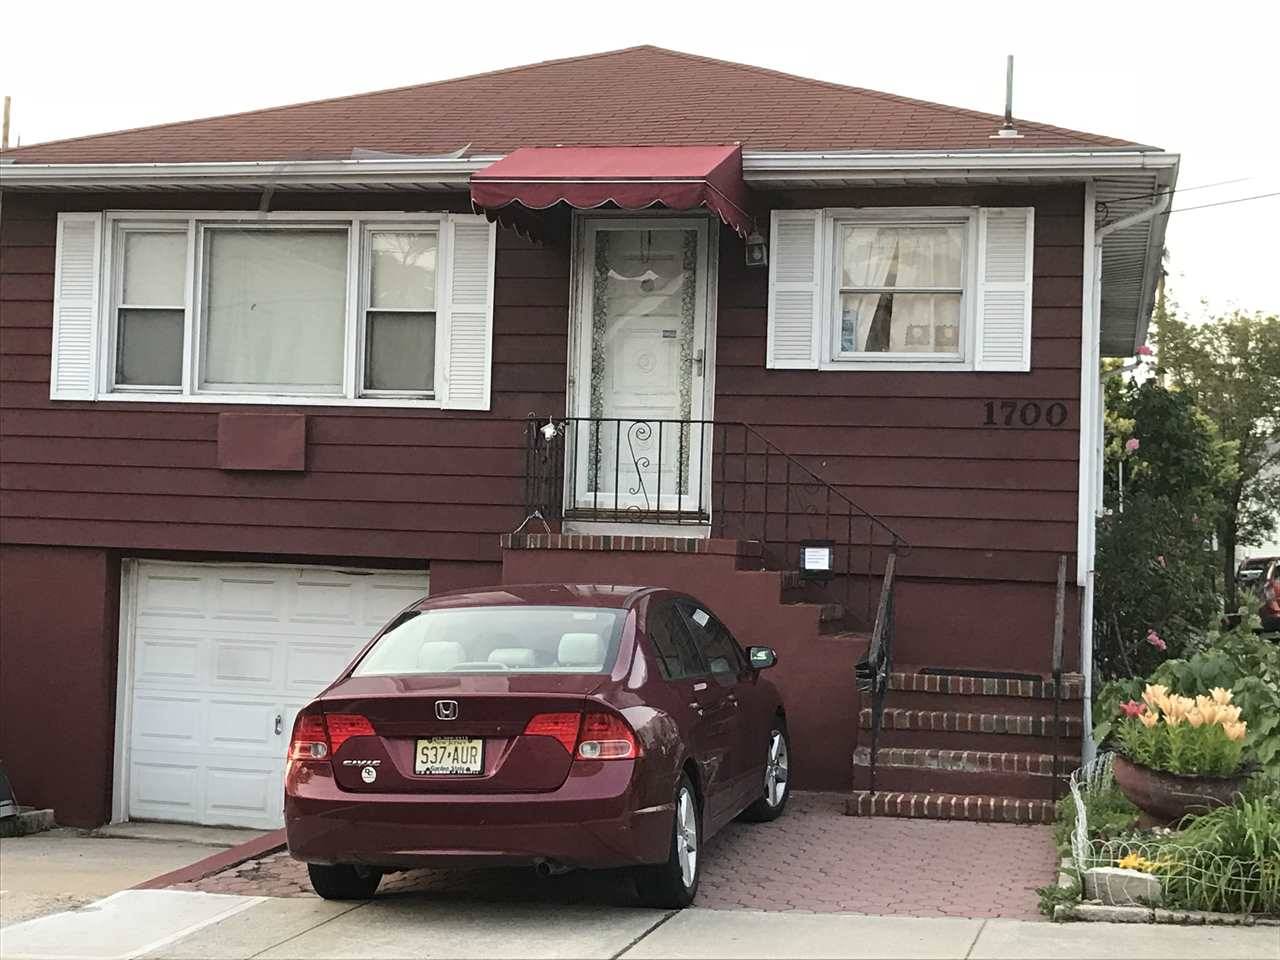 Single family Home - 3 BR New Jersey